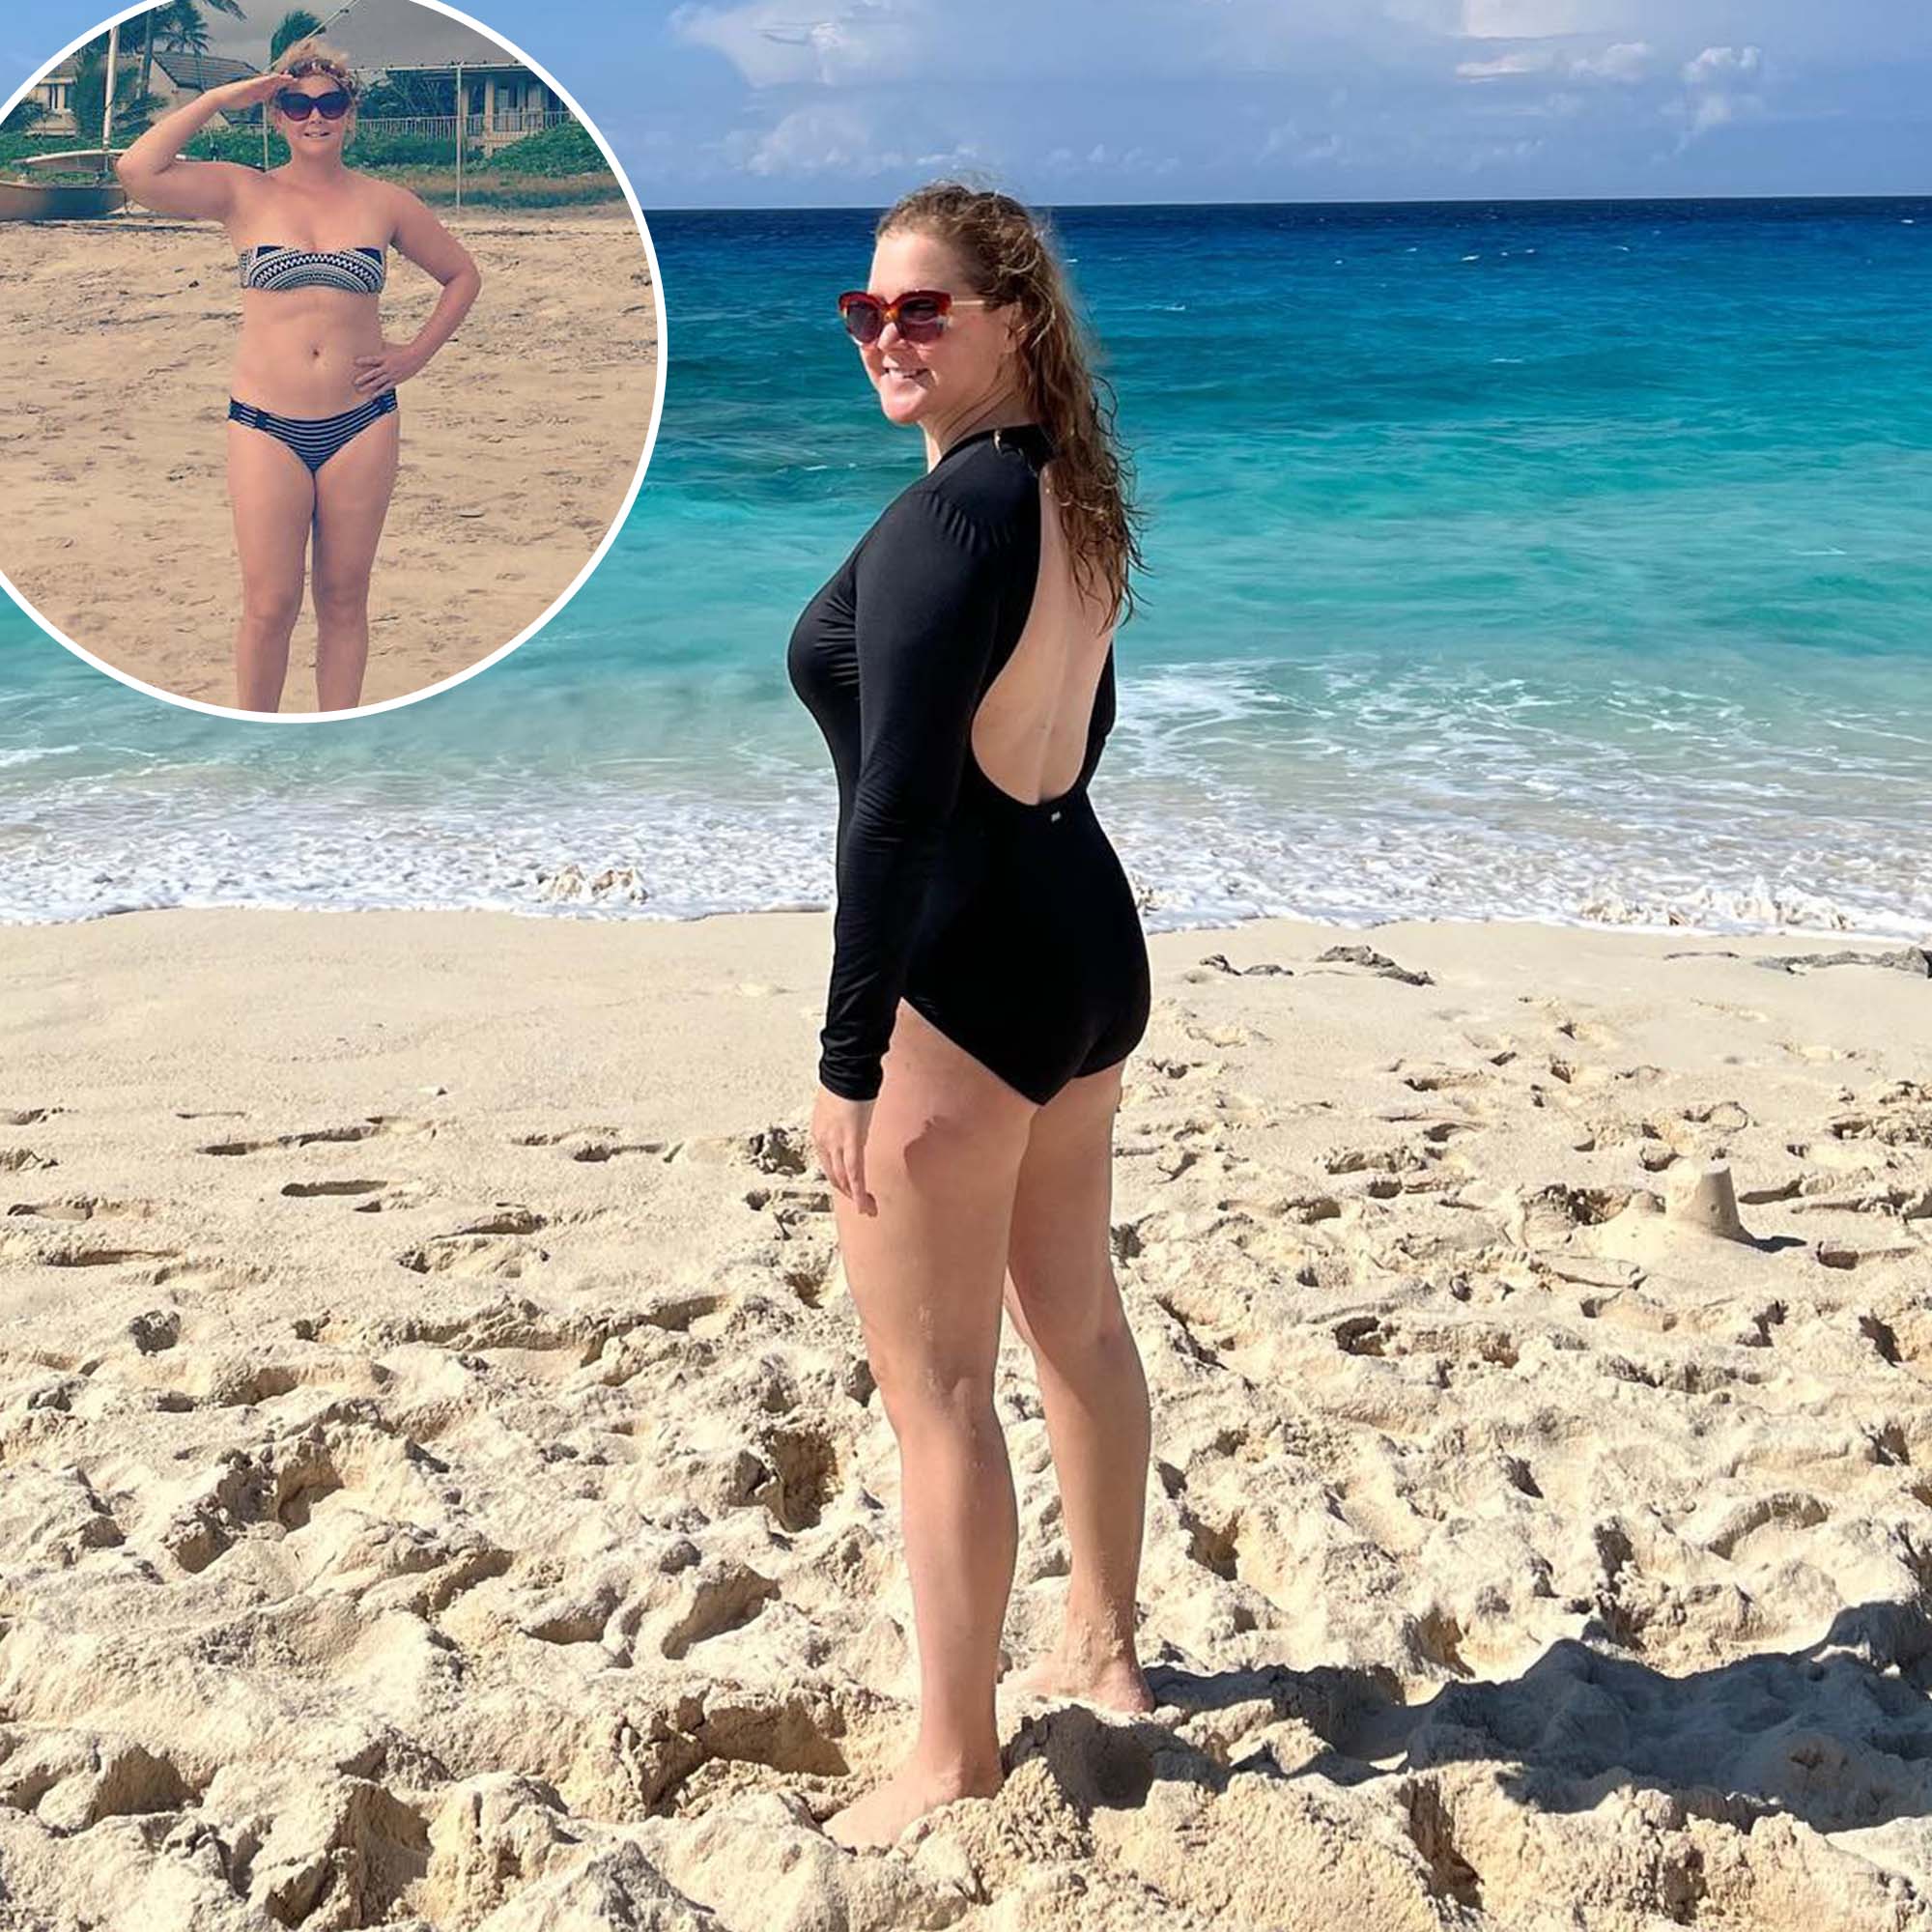 Swinger Nude Beach Gallery - Amy Schumer's Swimsuit Photos: See Bikinis, One-Pieces